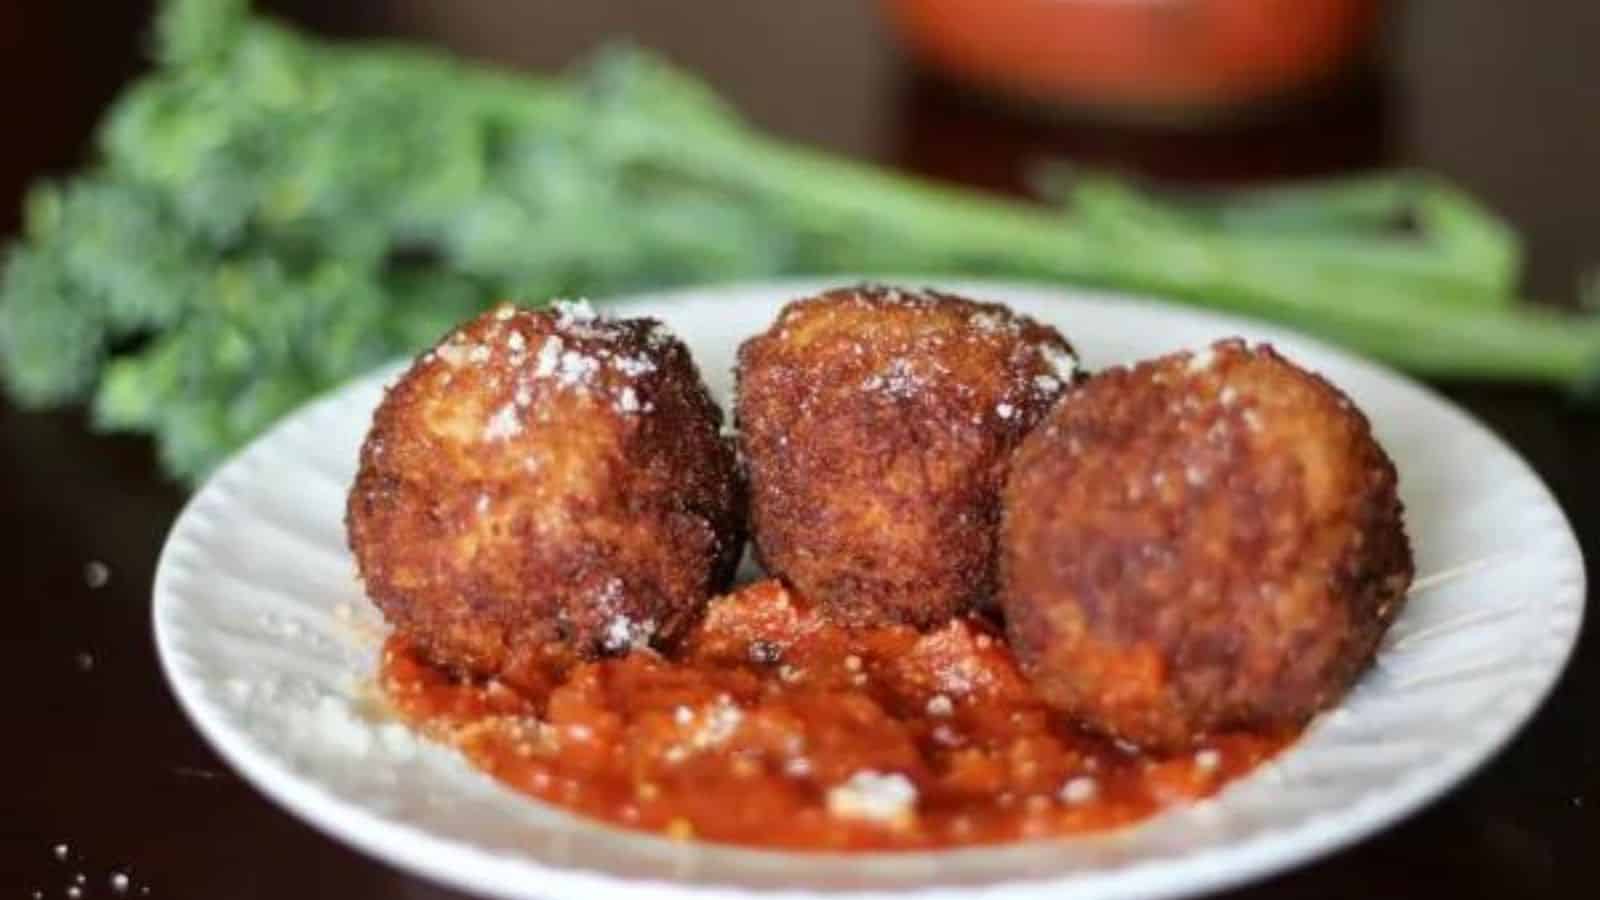 Plate of arancini with marinara and broccolini blurred in background.